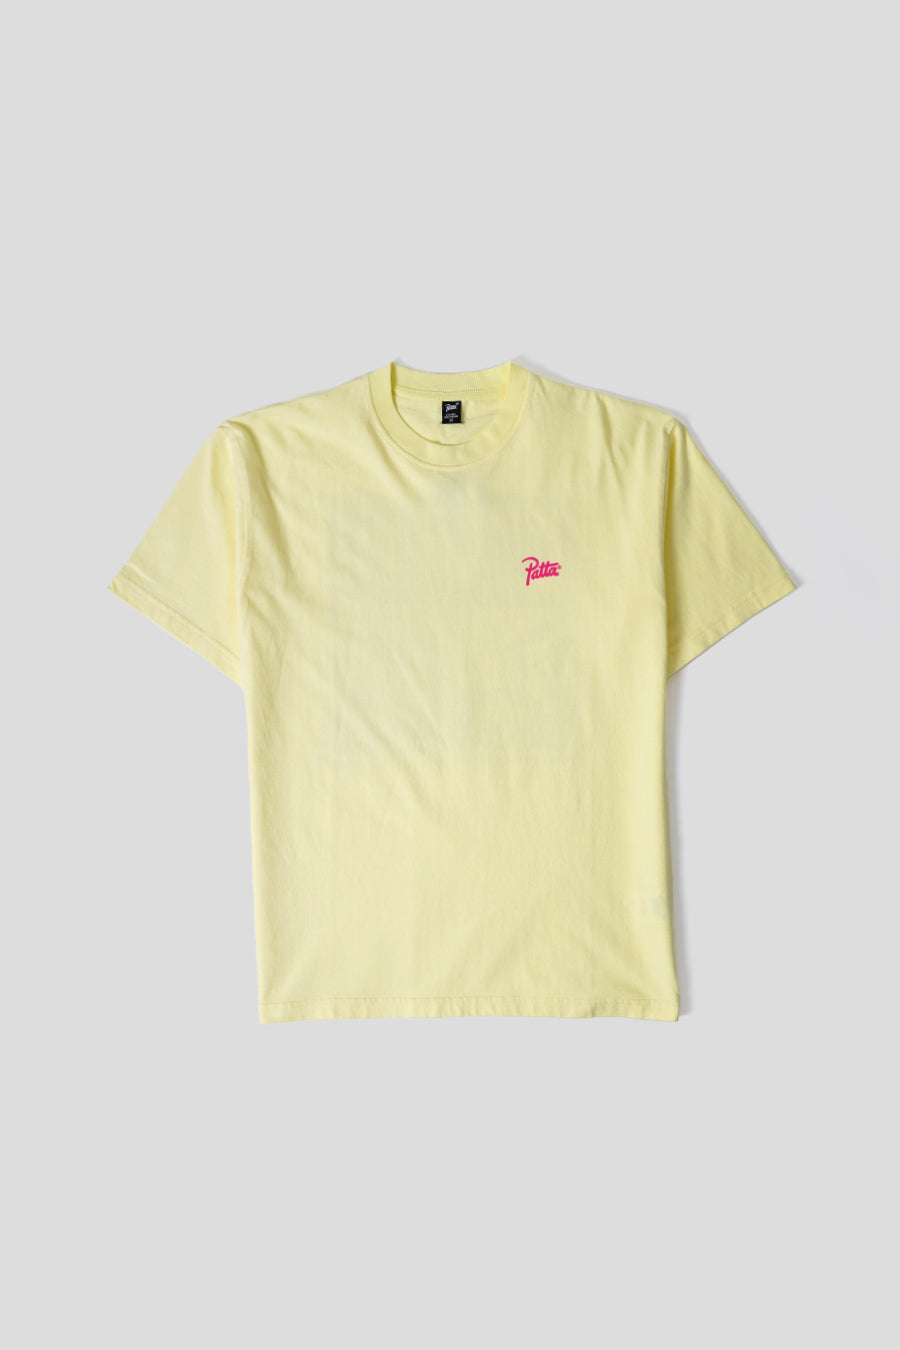 Patta - WAX YELLOW CO-EXISTENCE T-SHIRT - LE LABO STORE